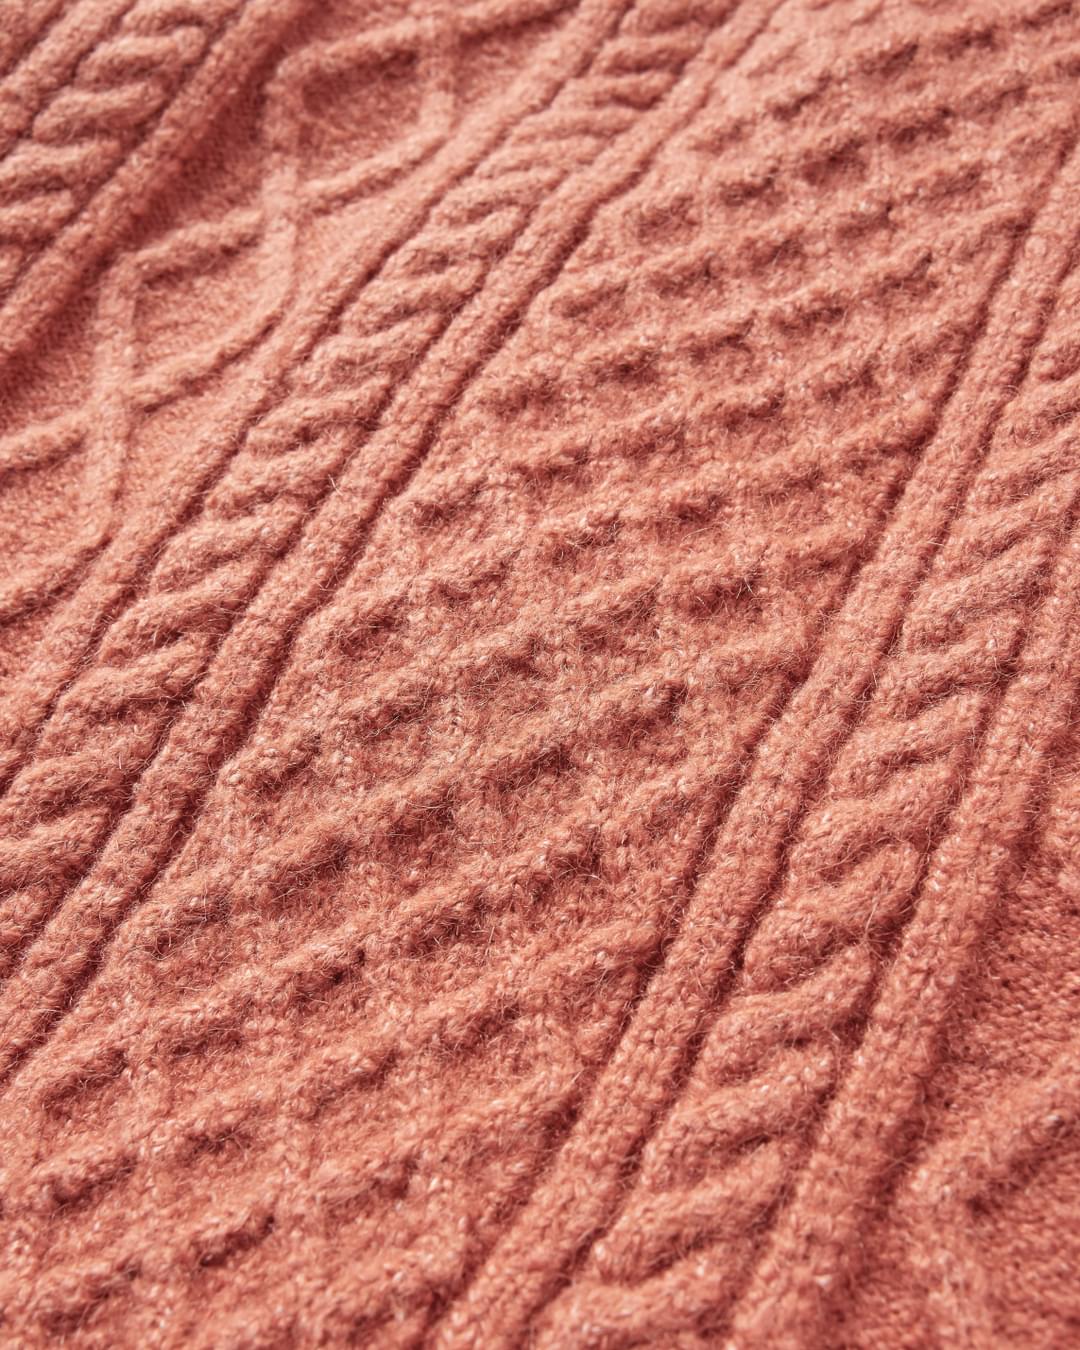 Sandbar Cable Knitted Jumper - Baked Clay